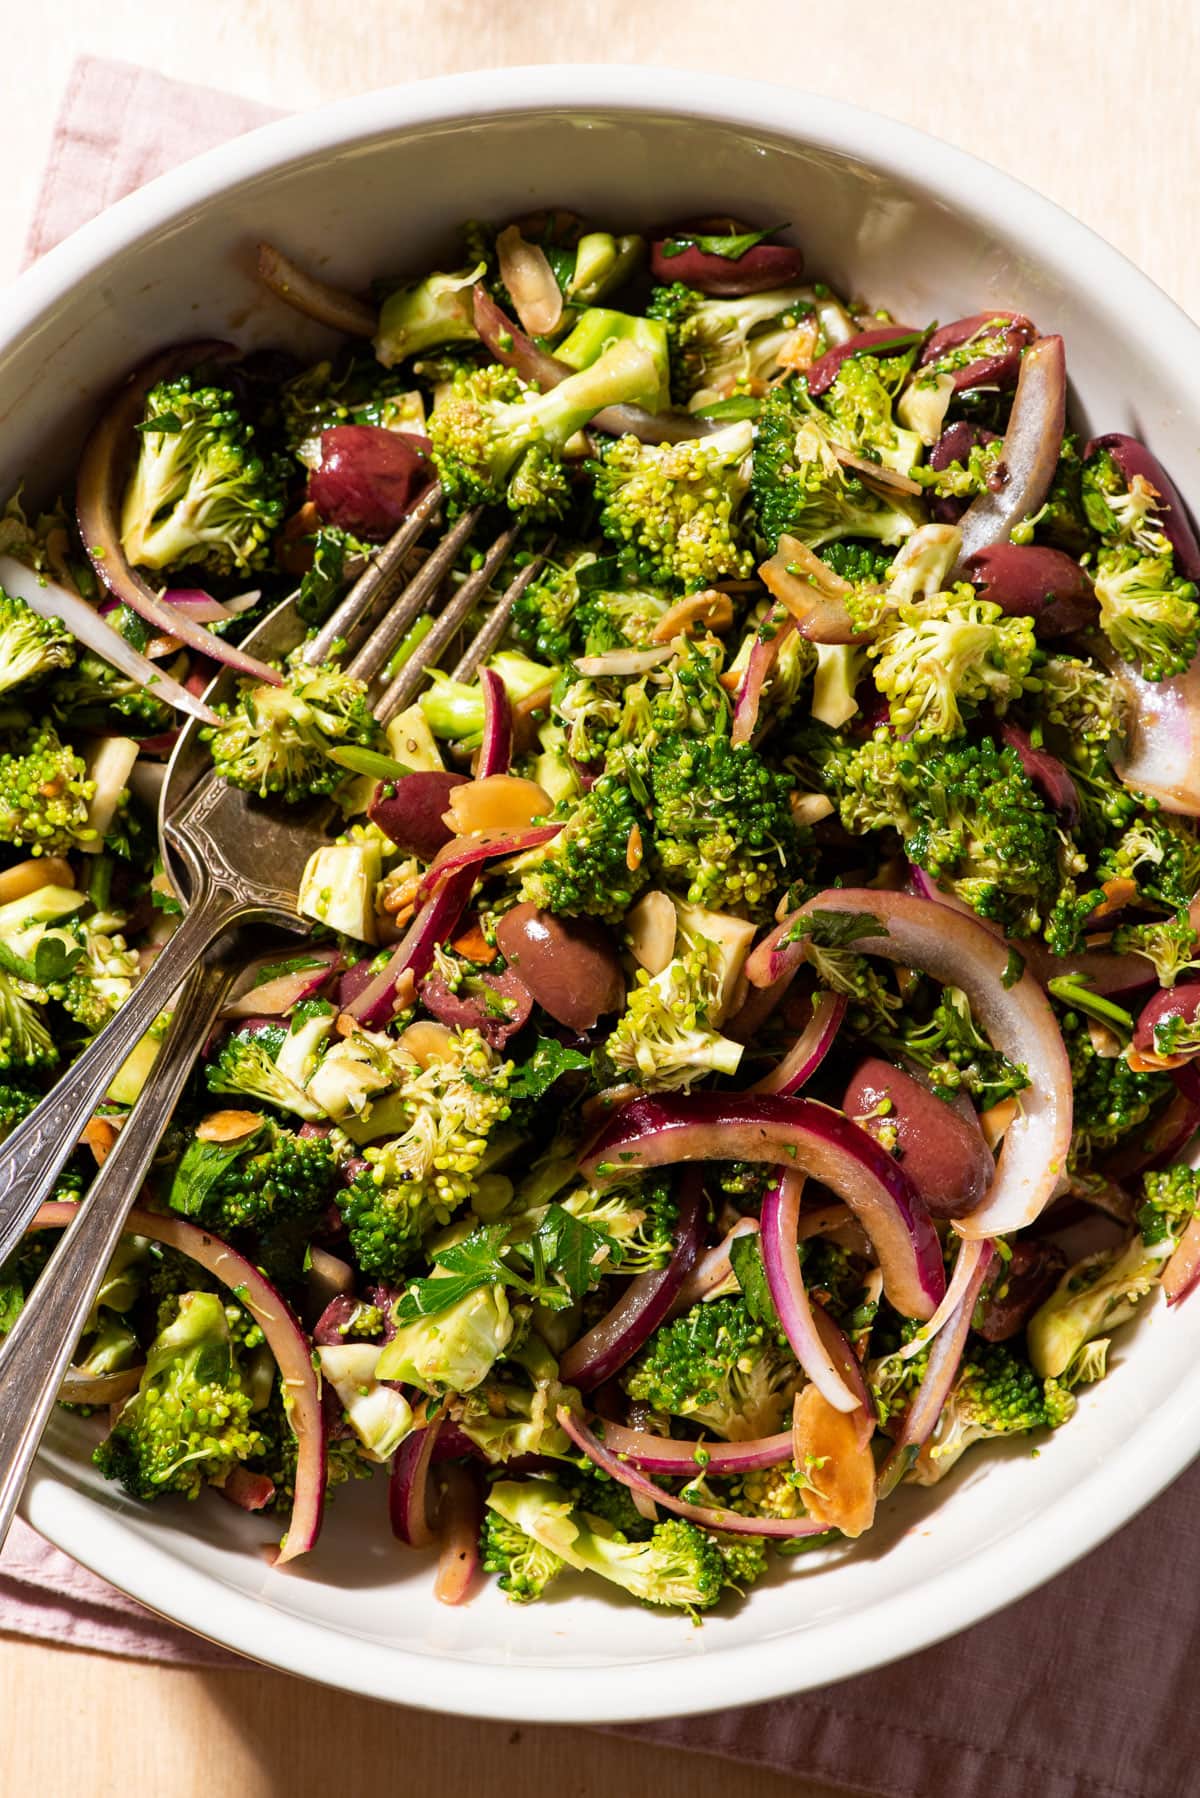 Healthy broccoli salad recipe with red onions and olives (without mayo).